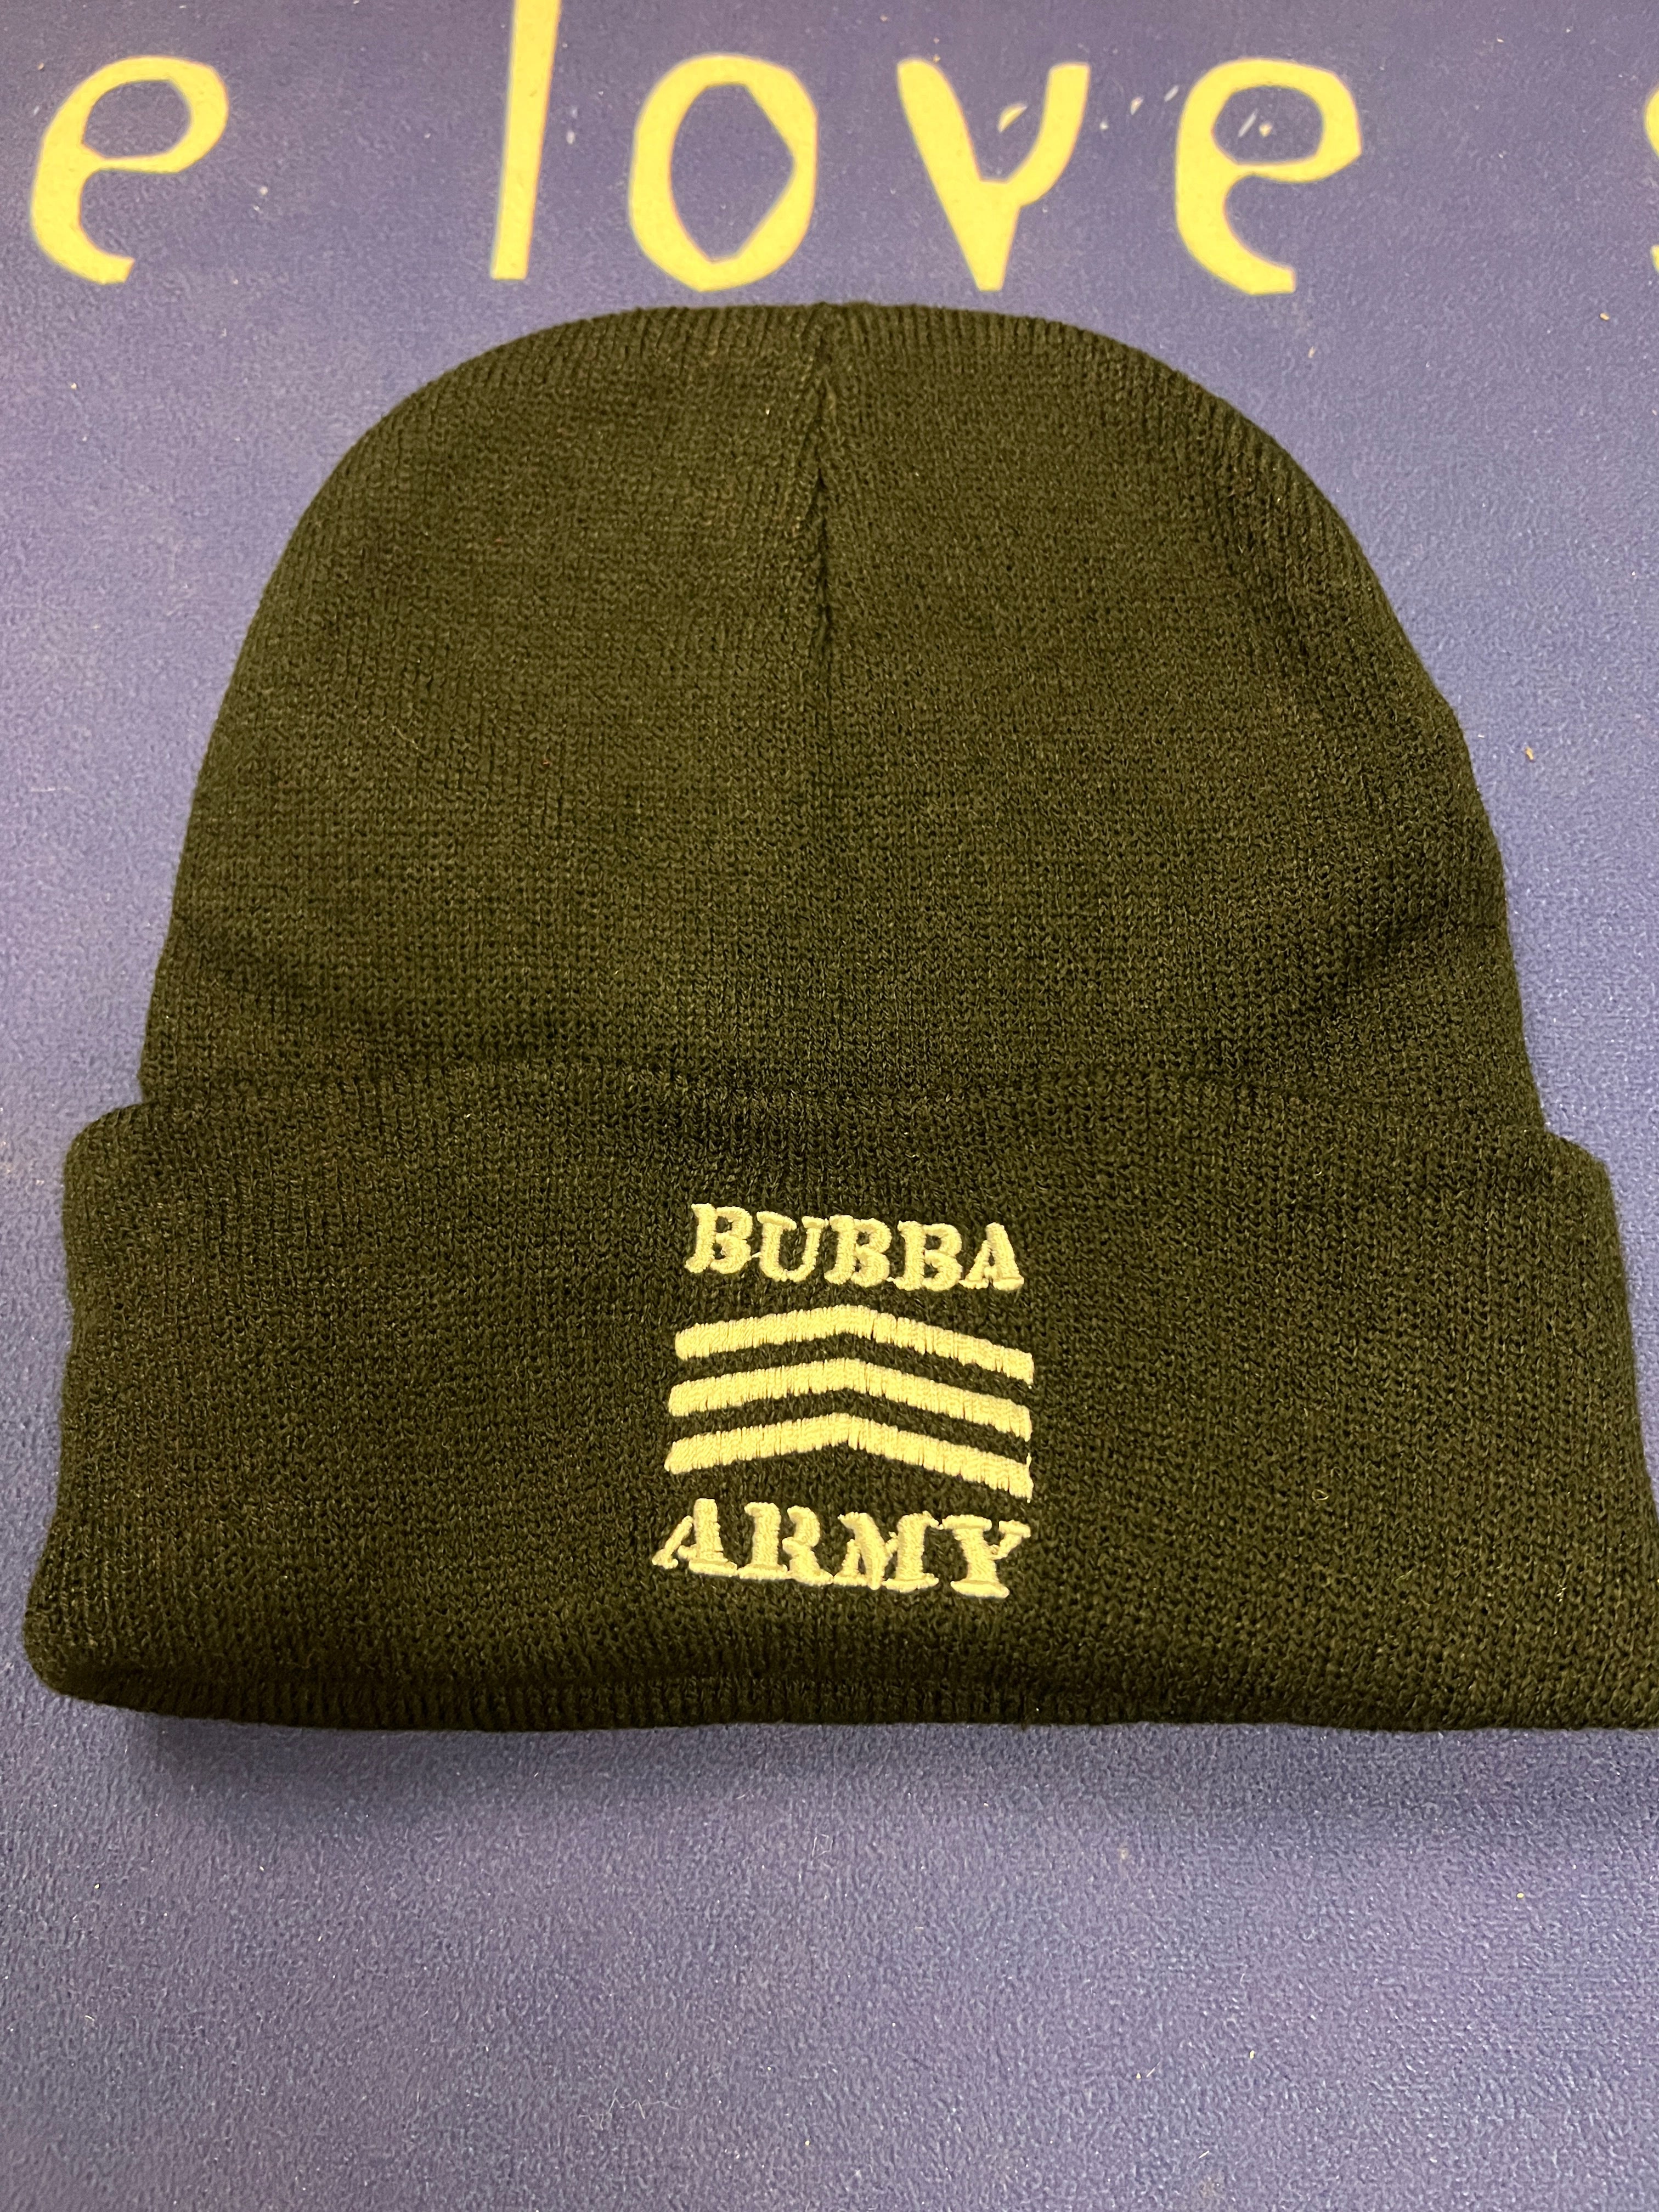 Black Custom Bubba Army Beanie with logo embroidered on cuff.